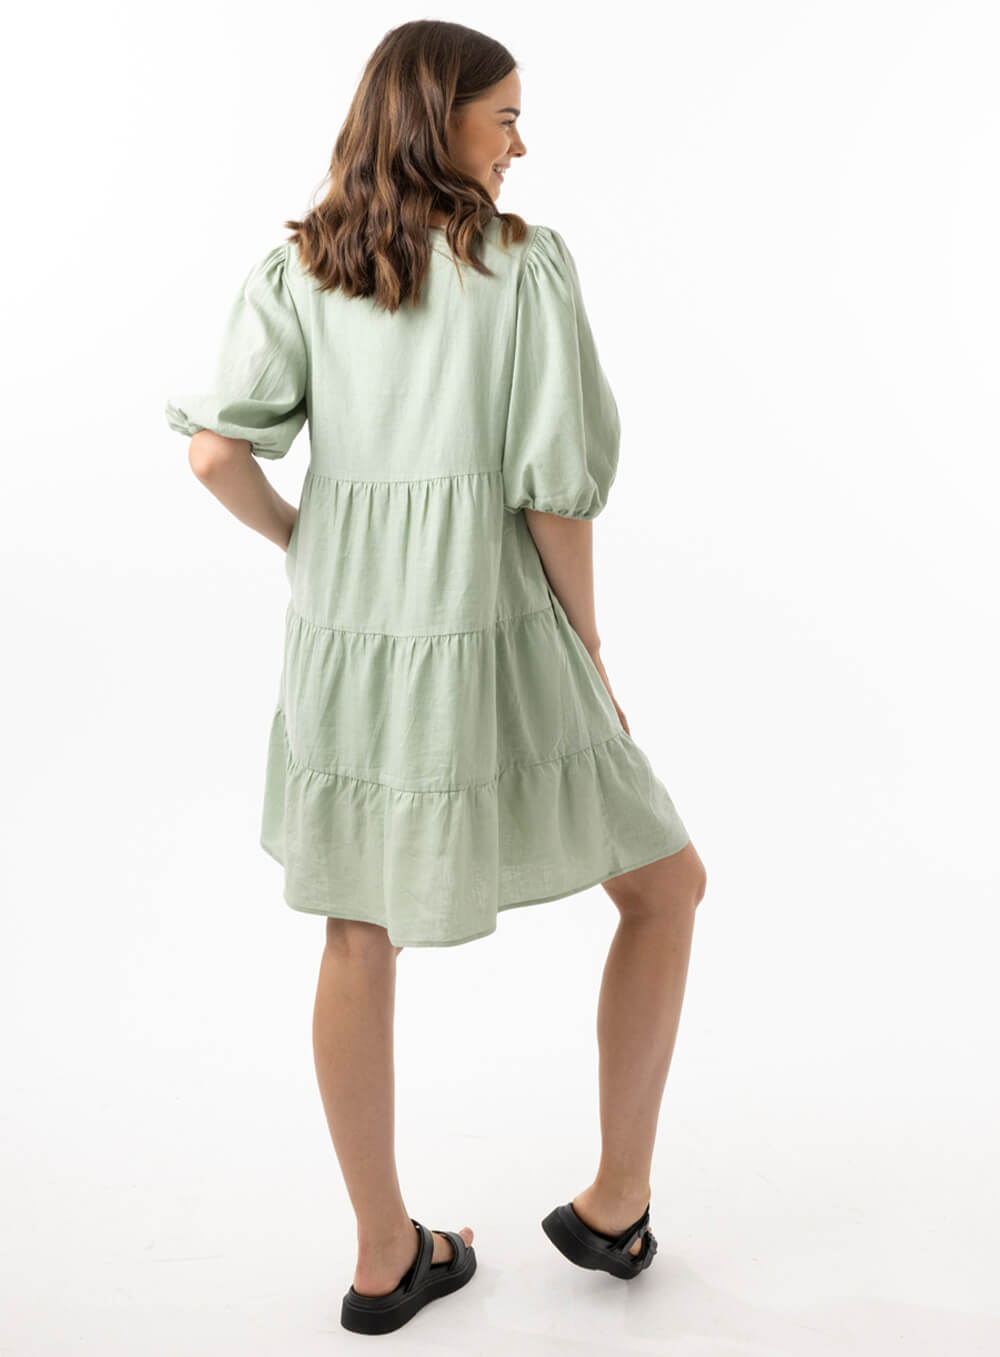 The Eleanor mini dress in sage features a flowing layered a line shape with draping linen/viscose fabric, puff 3/4 sleeves with elastic cuff which can be pushed up to the elbow, a dropped v shape neckline with a square finish.